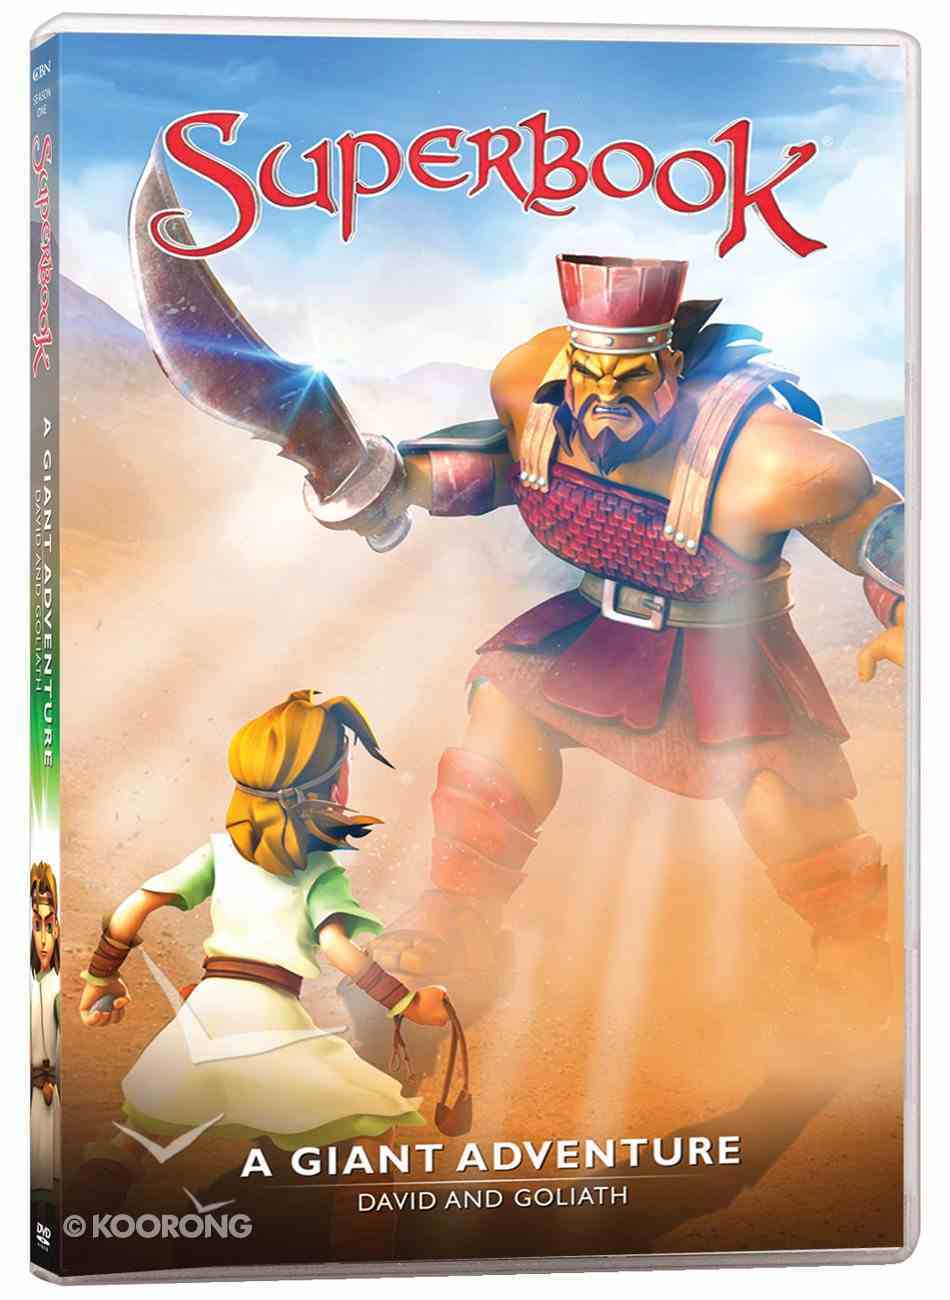 Giant Adventure, a - David and Goliath (#05 in Superbook Dvd Series Season 01) DVD